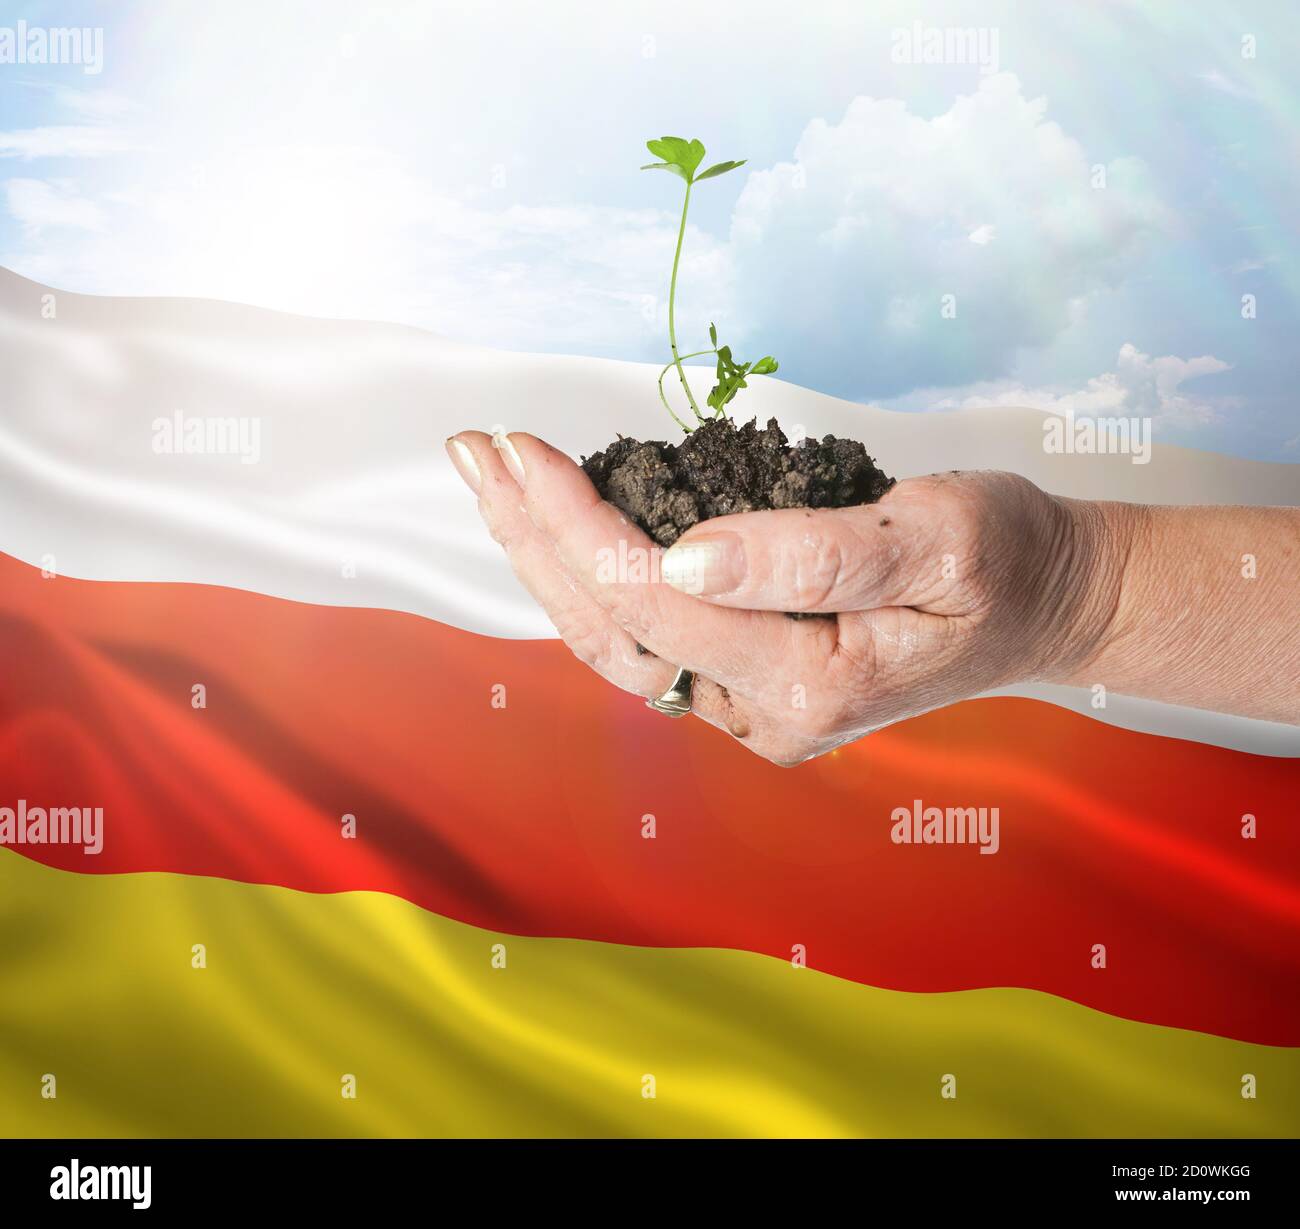 South Ossetia growth and new beginning. Green renewable energy and ecology concept. Hand holding young plant. Stock Photo